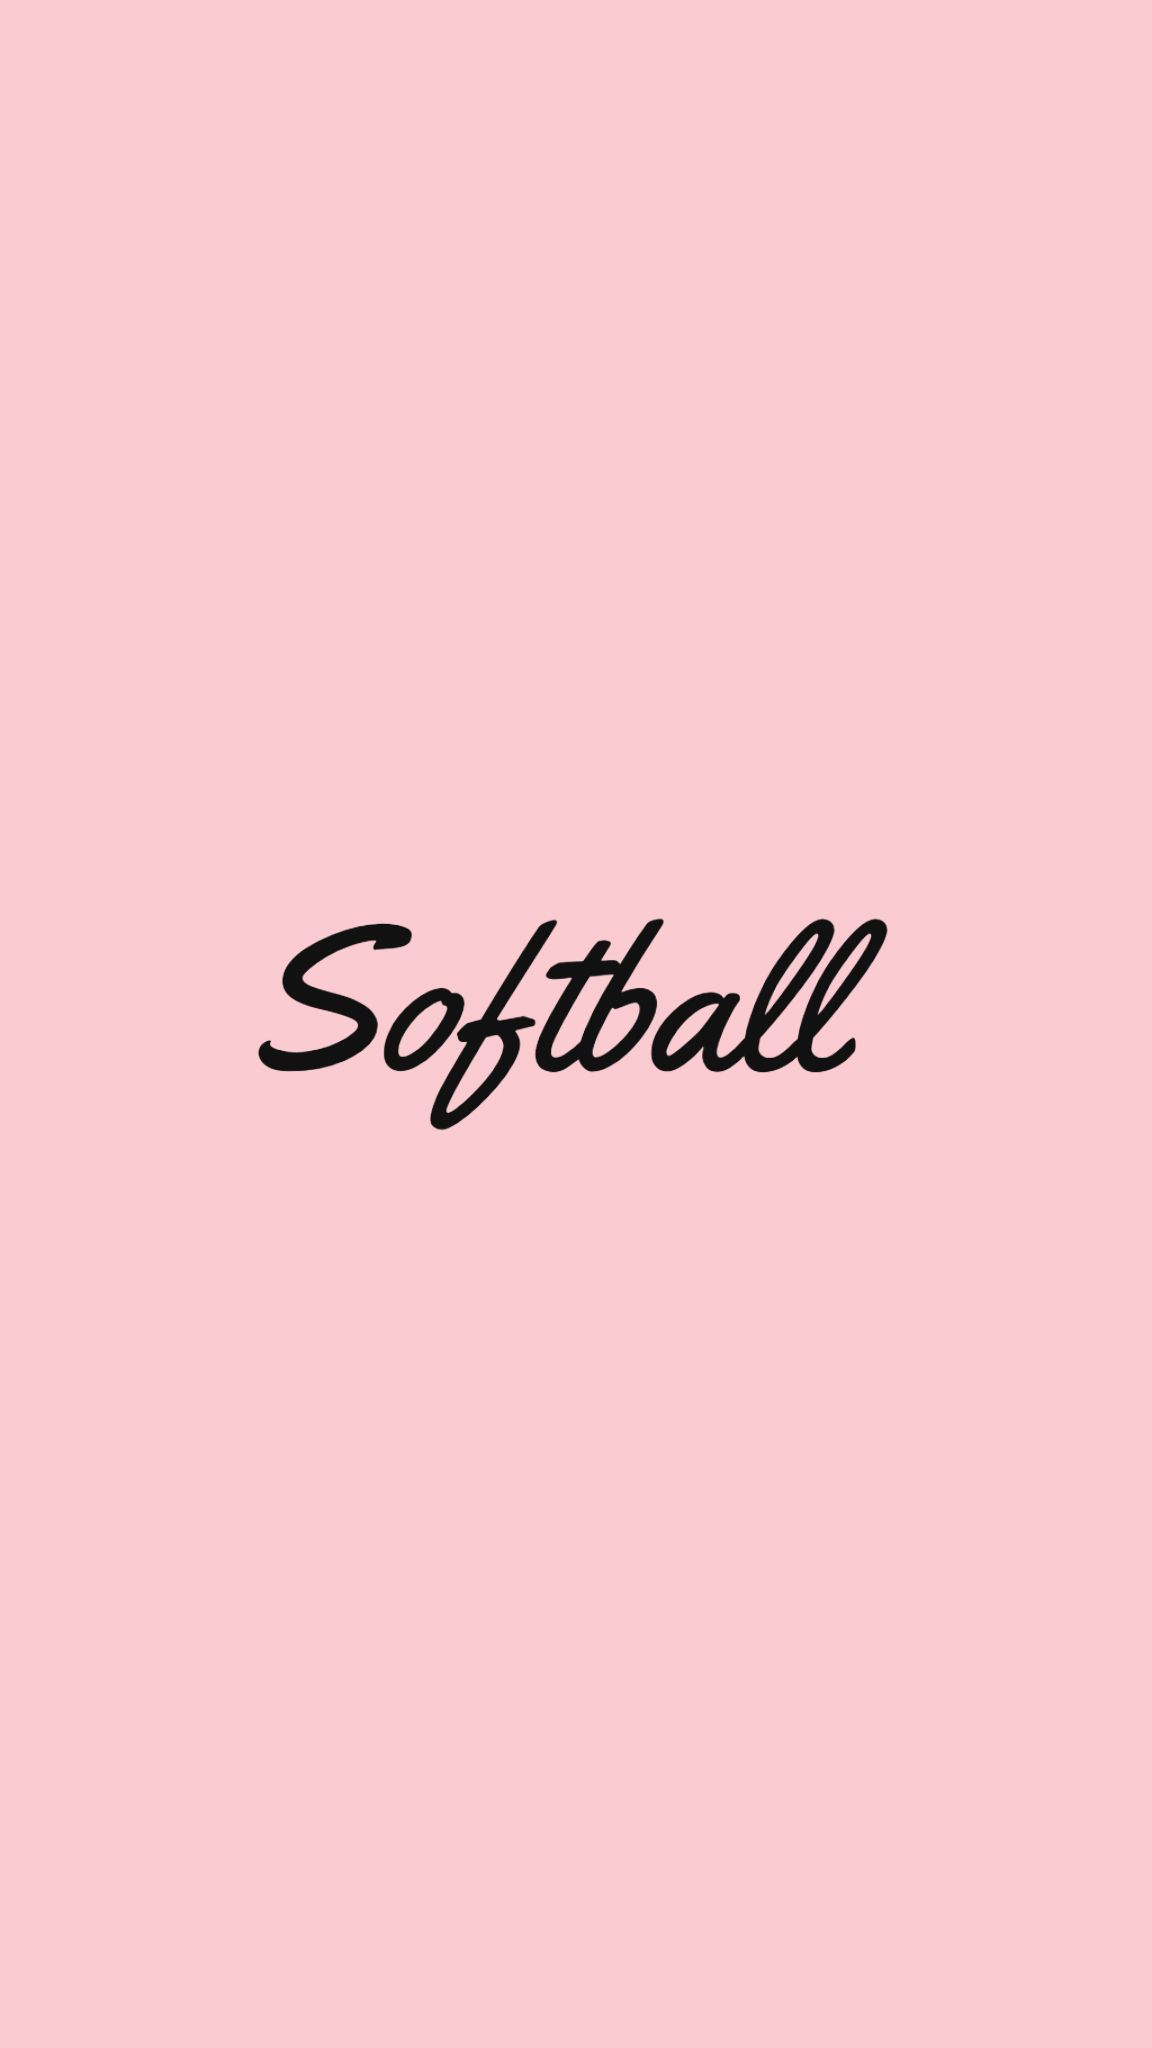 Softball Aesthetic Wallpapers - Wallpaper Cave